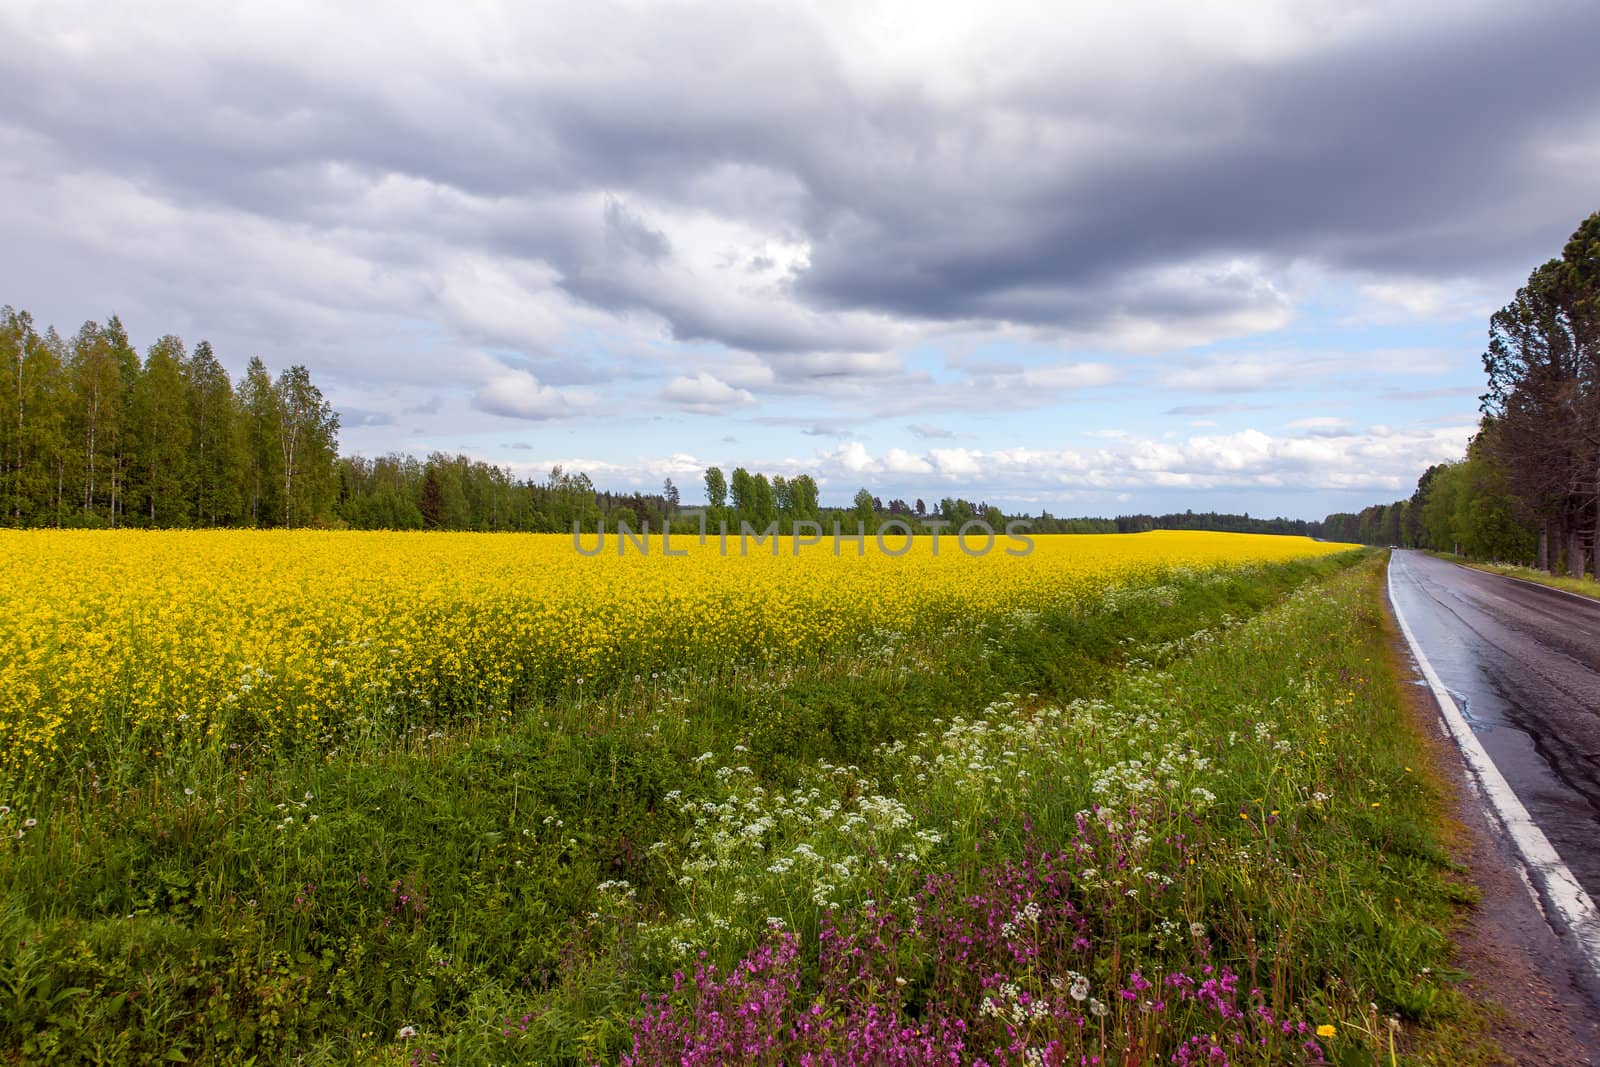 View of a Field of Bright Yellow rapeseed in front of a forest